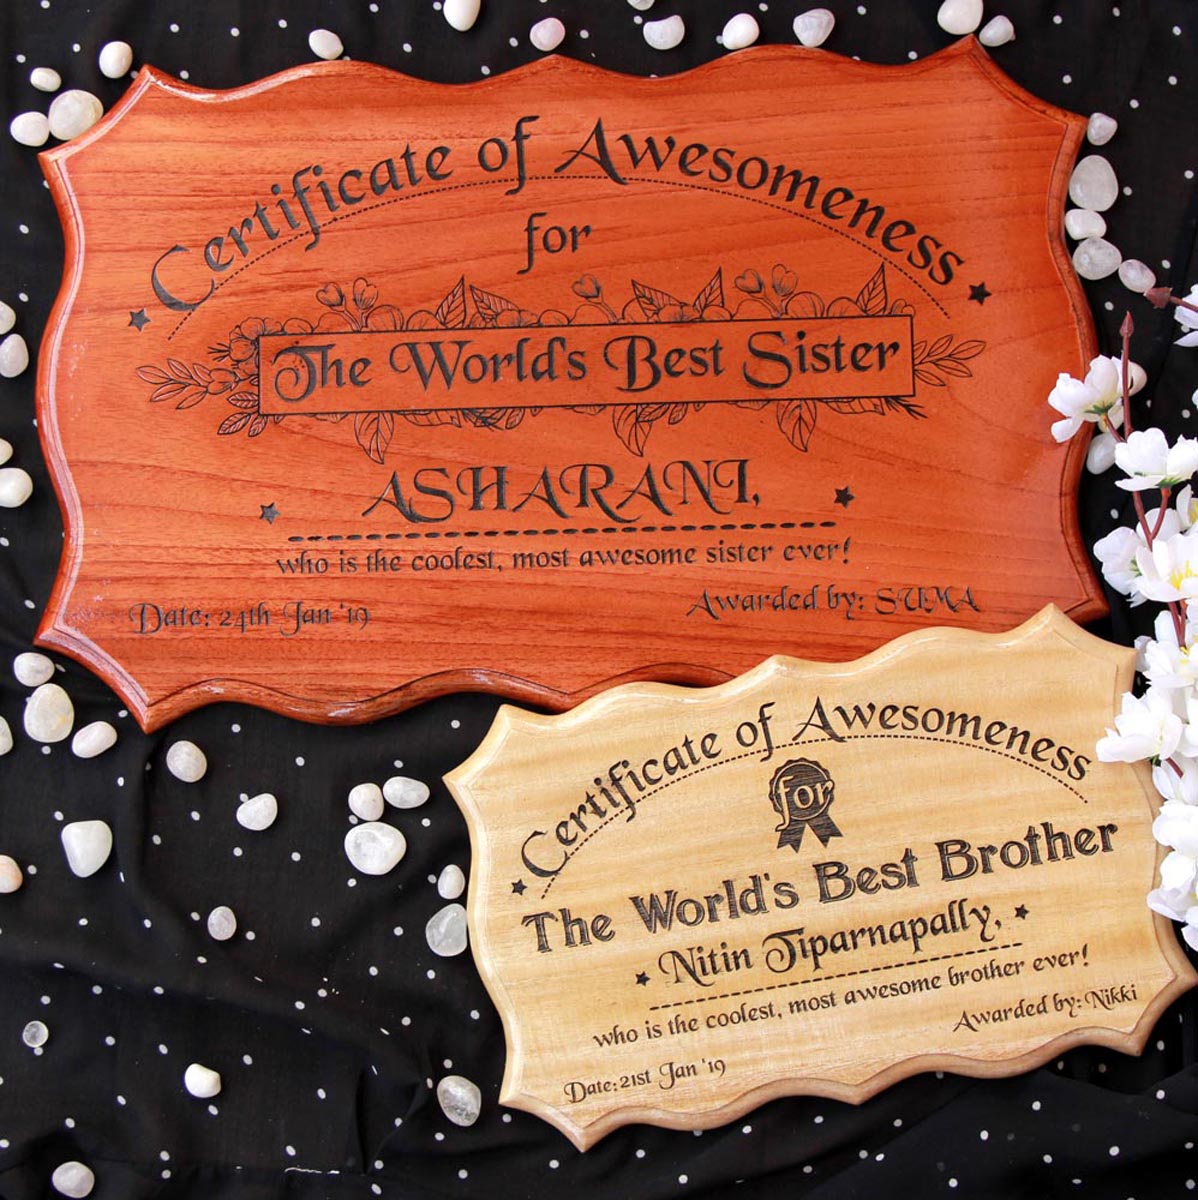 The World's Best Brother Wooden Certificate And The World's Best Sister Wooden Certificate - These Certificate Of Appreciation Make Perfect Rakhi Gifts - Looking For Personalized Gifts For Brothers And Sisters? These Certificates of Appreciation Make The Best Gift Ideas For Sisters And Brothers.